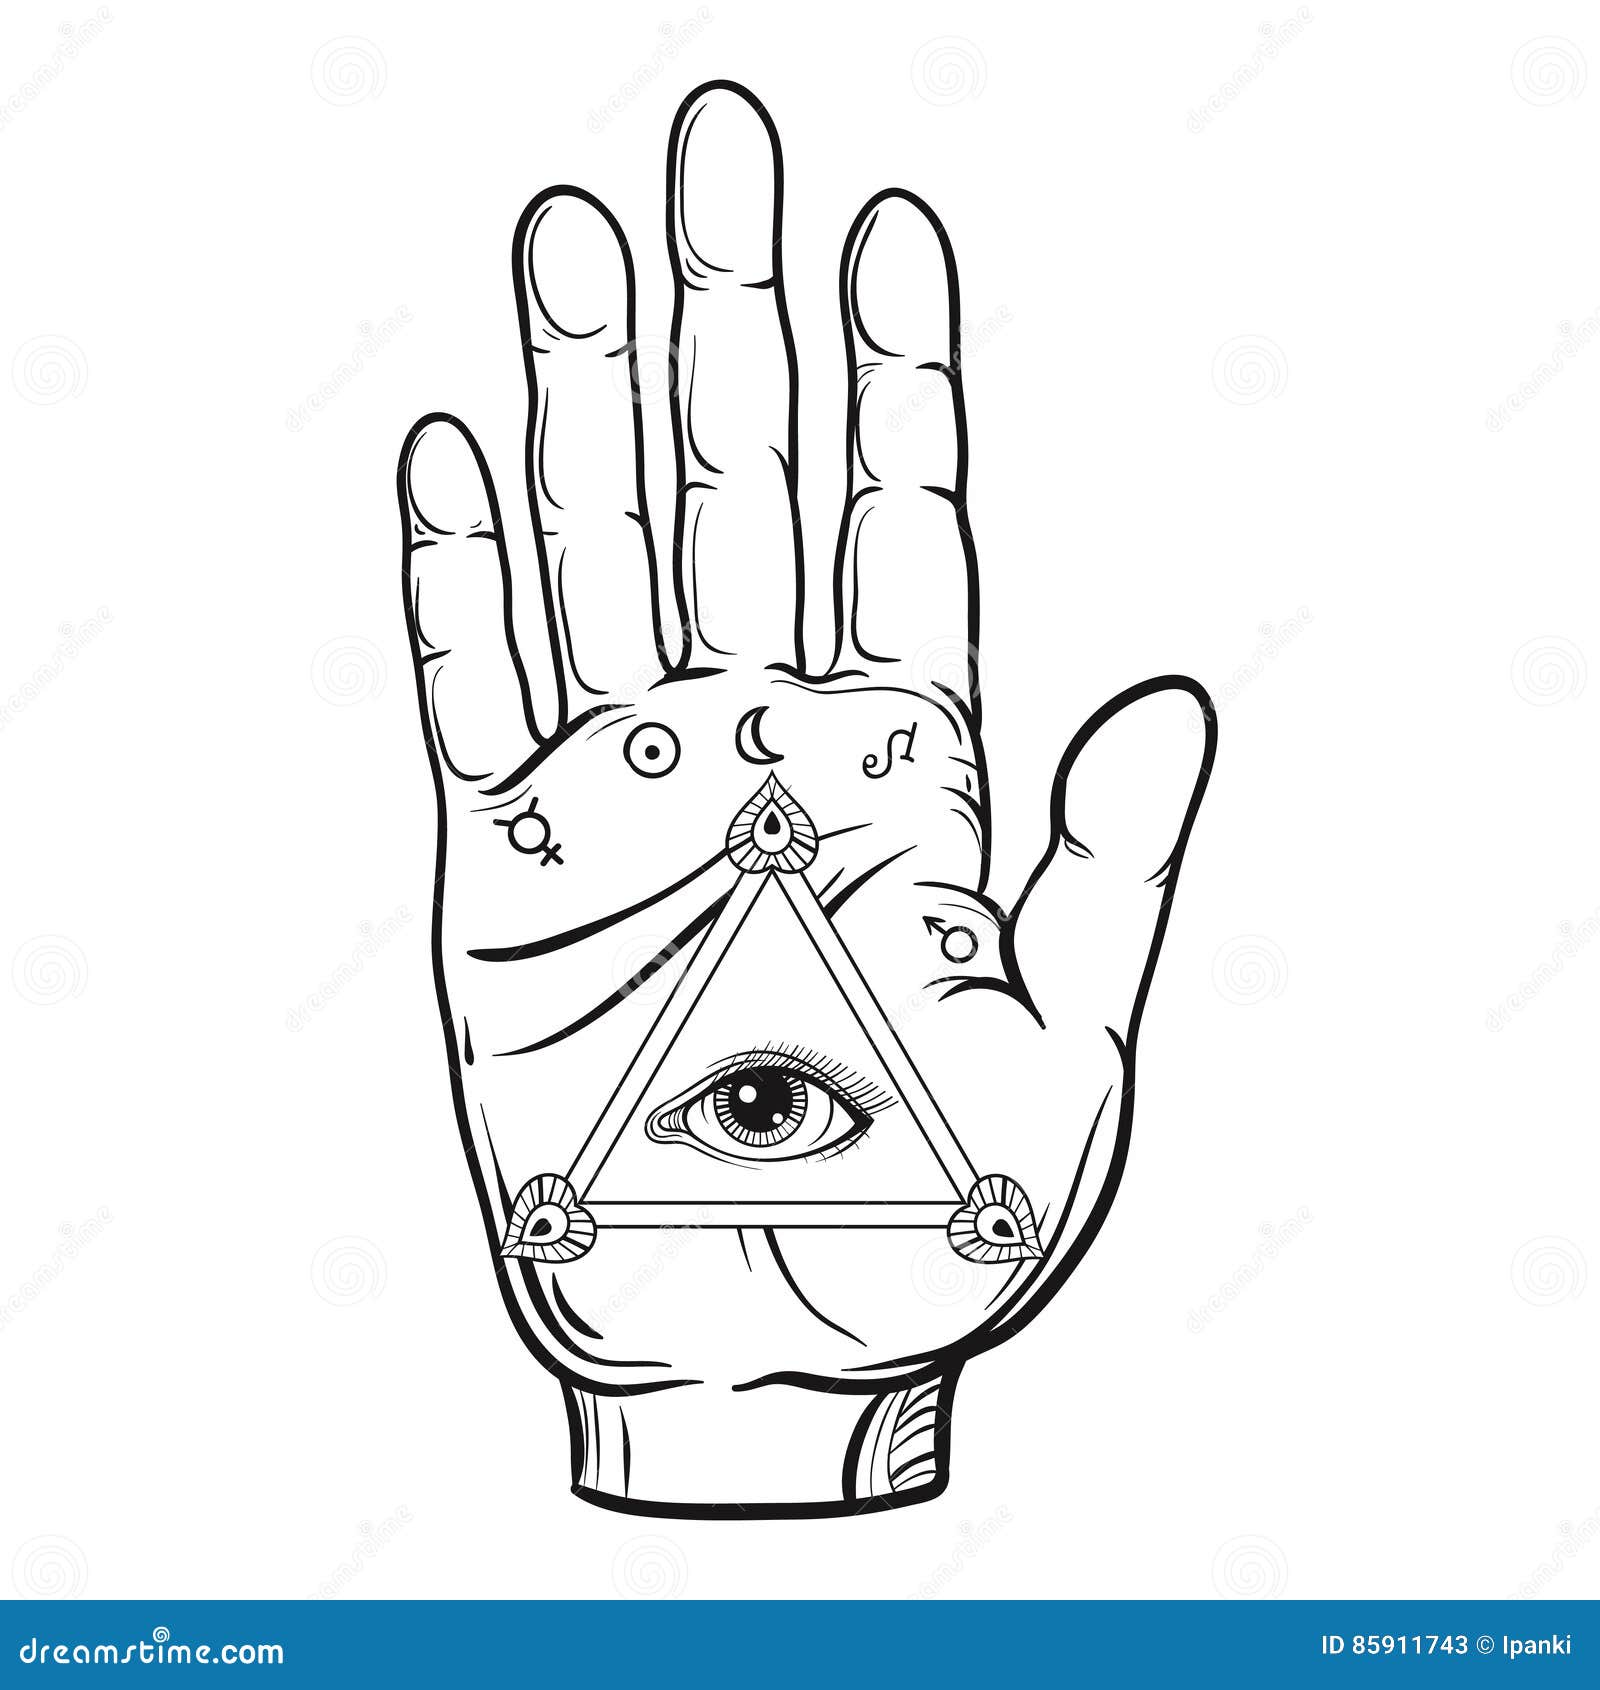  fortune teller hand sketch with hand drawn all seeing eye